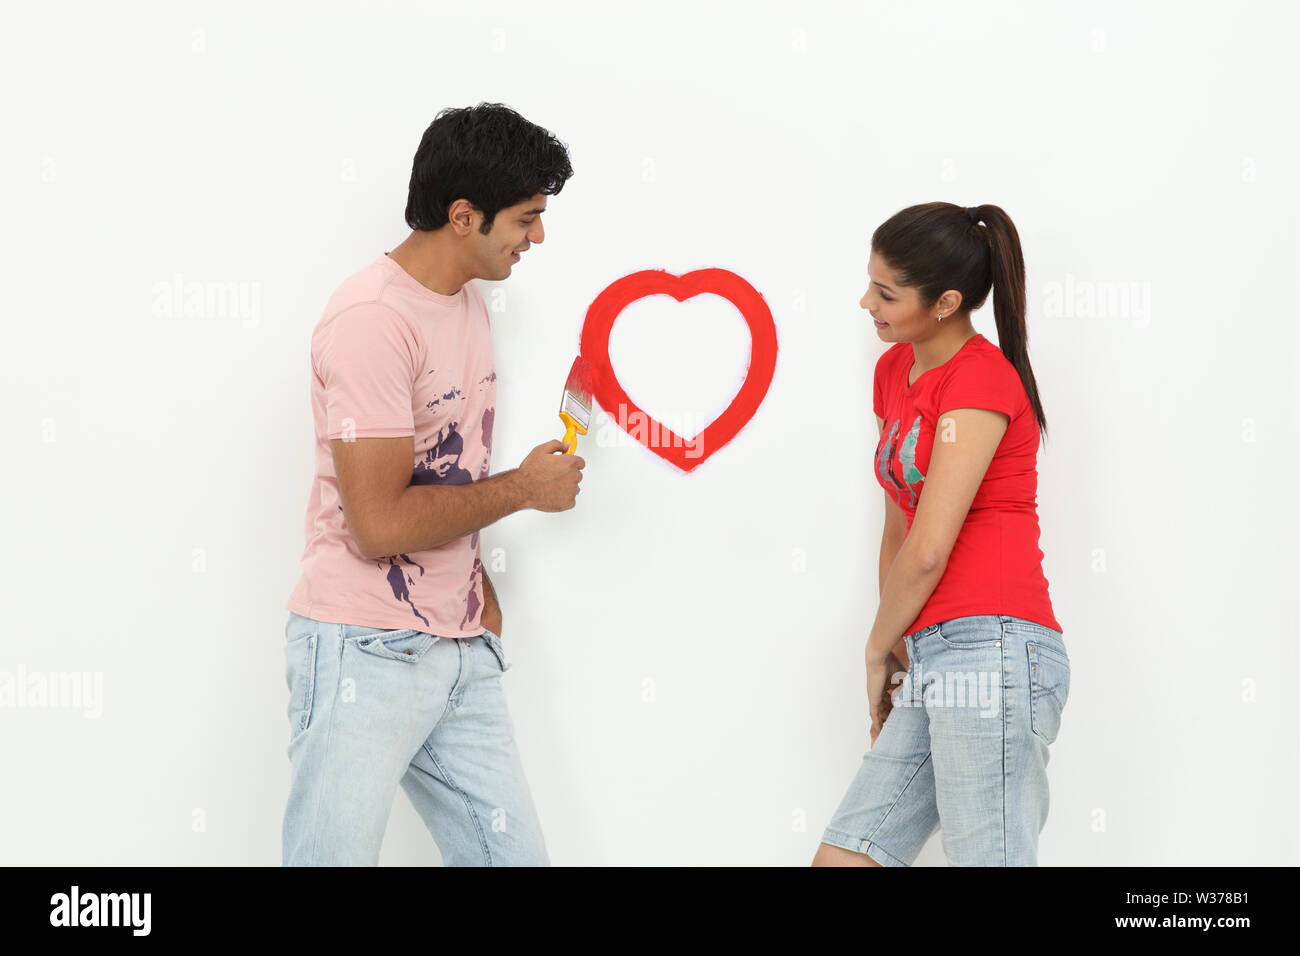 Couple painting heart on a wall Stock Photo